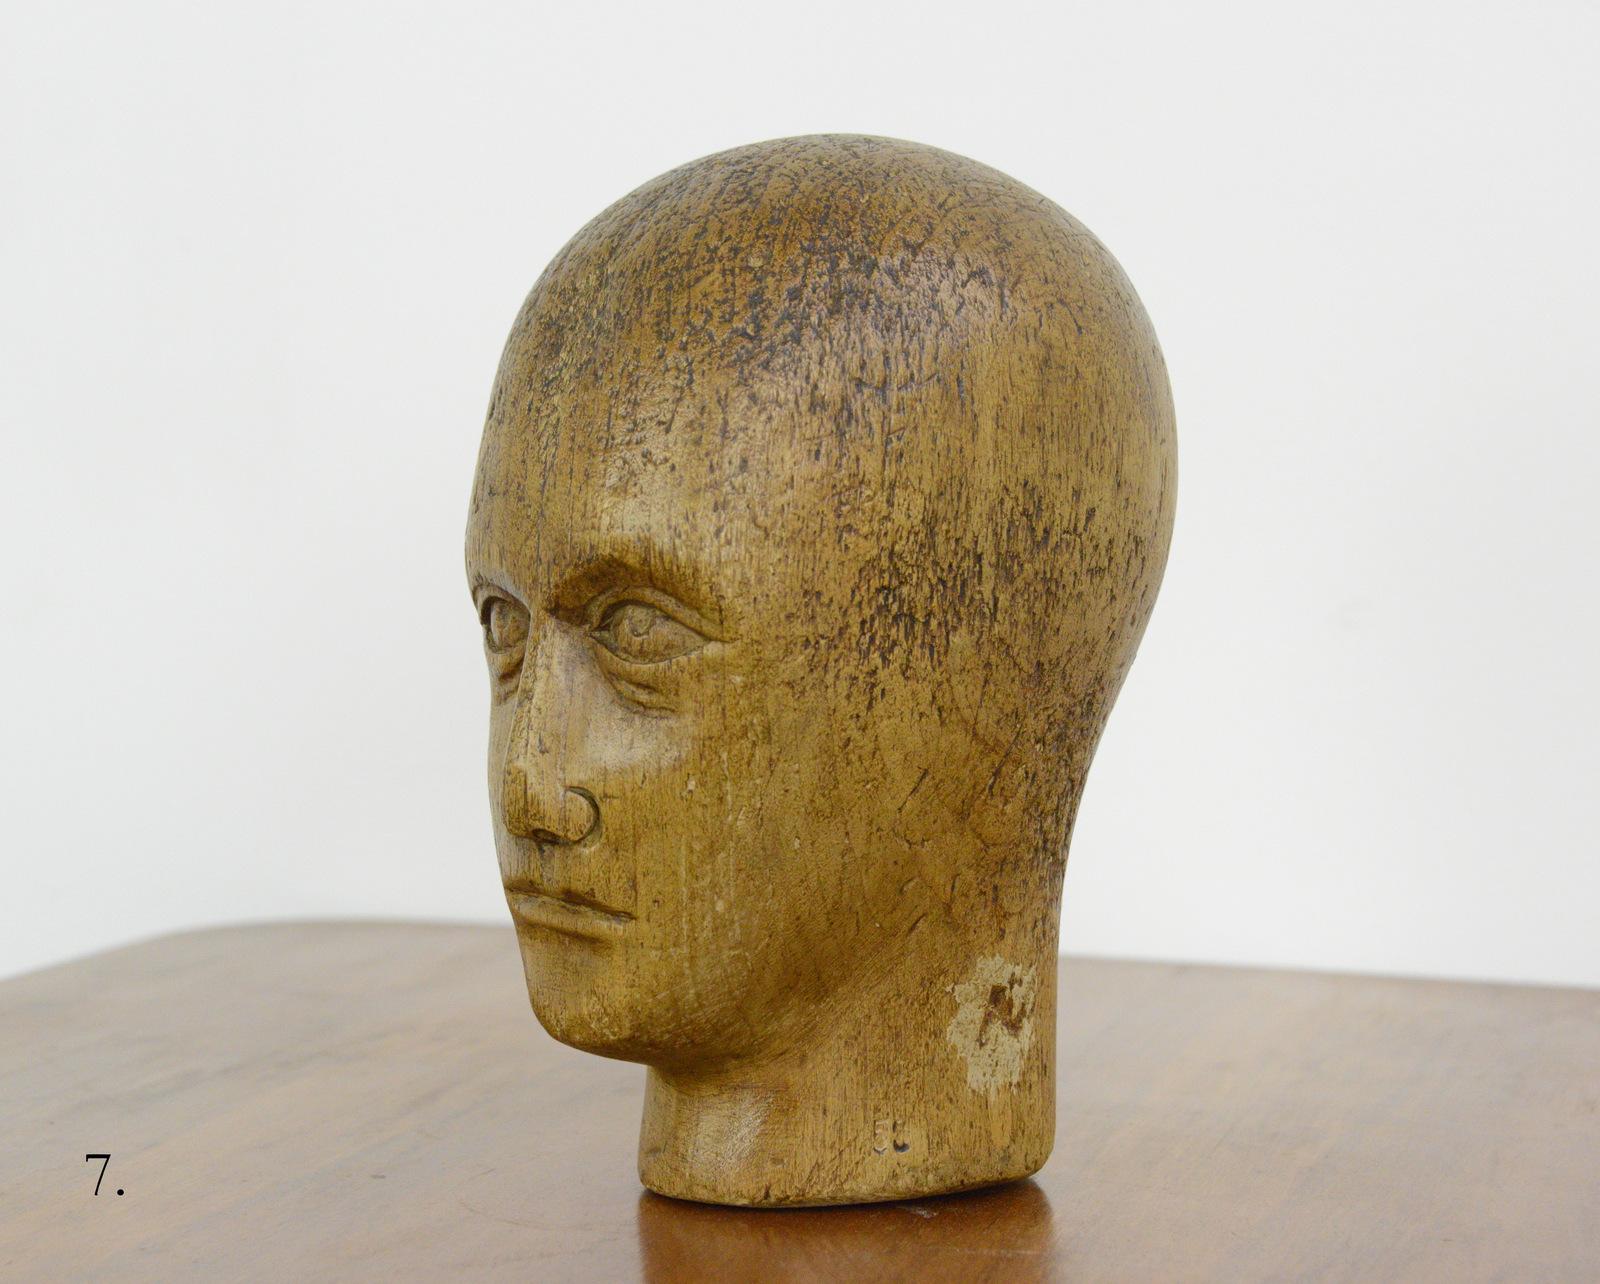 German carved wooden Milliners Head, circa 1920

- Hand carved from sycamore
- Used in the displaying and making of hats
- German ~ 1920
- Measures: 25cm tall x 15cm wide x 18cm deep

Condition report

Signs of its previous in the form of